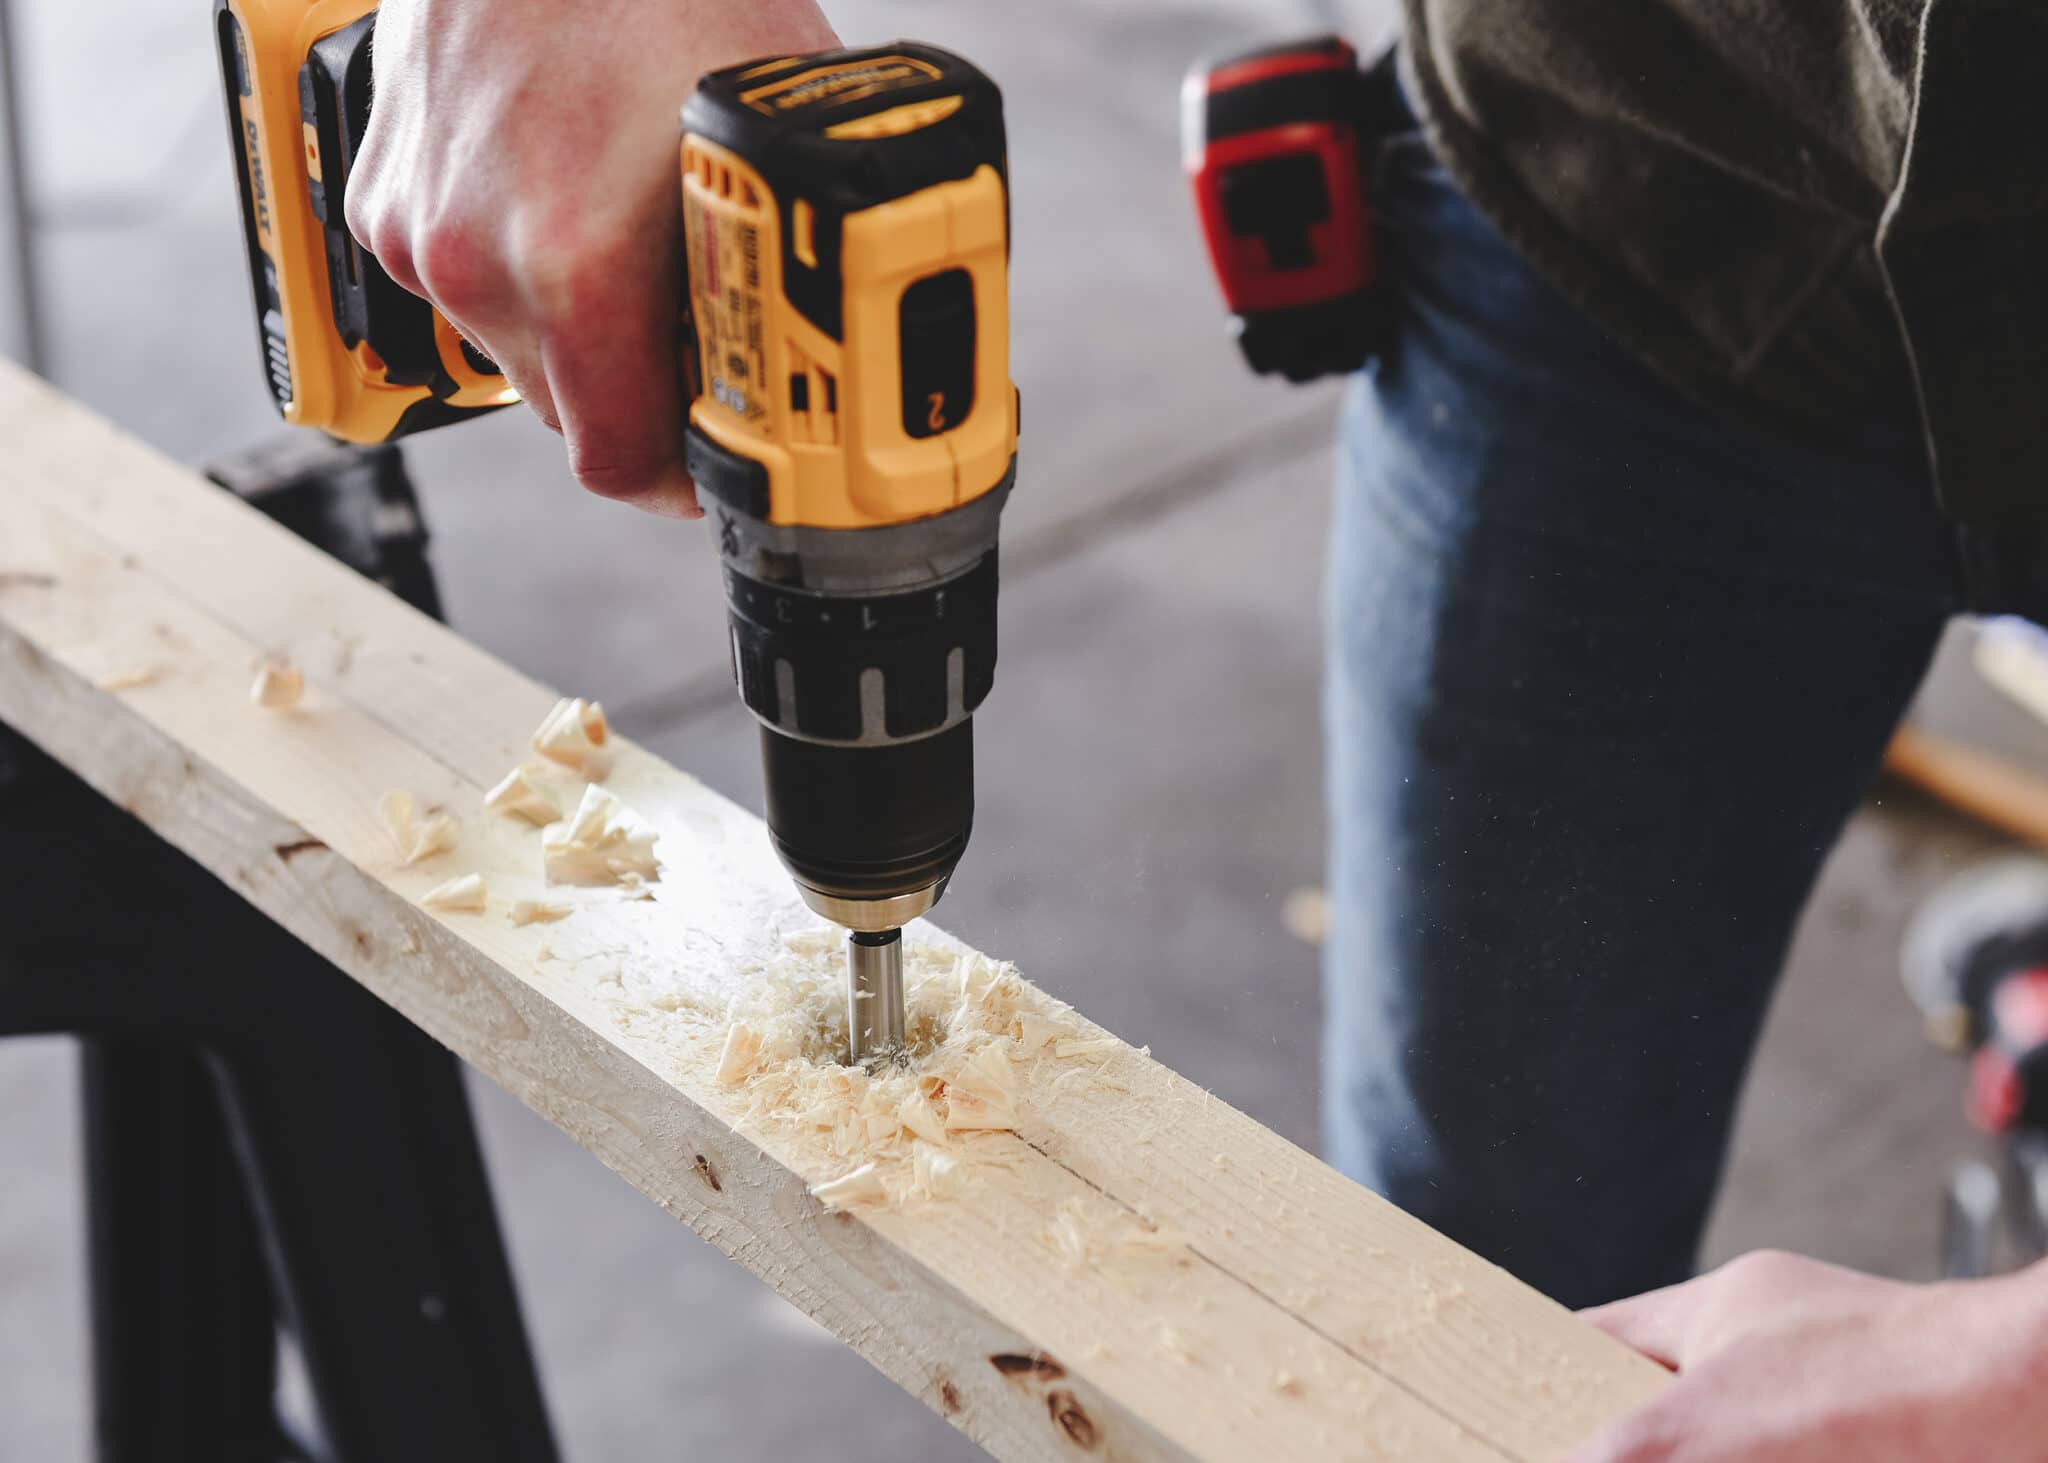 We used a 1 1/4" Forstner bit on our drill to cut perfectly sized holes for the rungs. via // yellowbrickhome